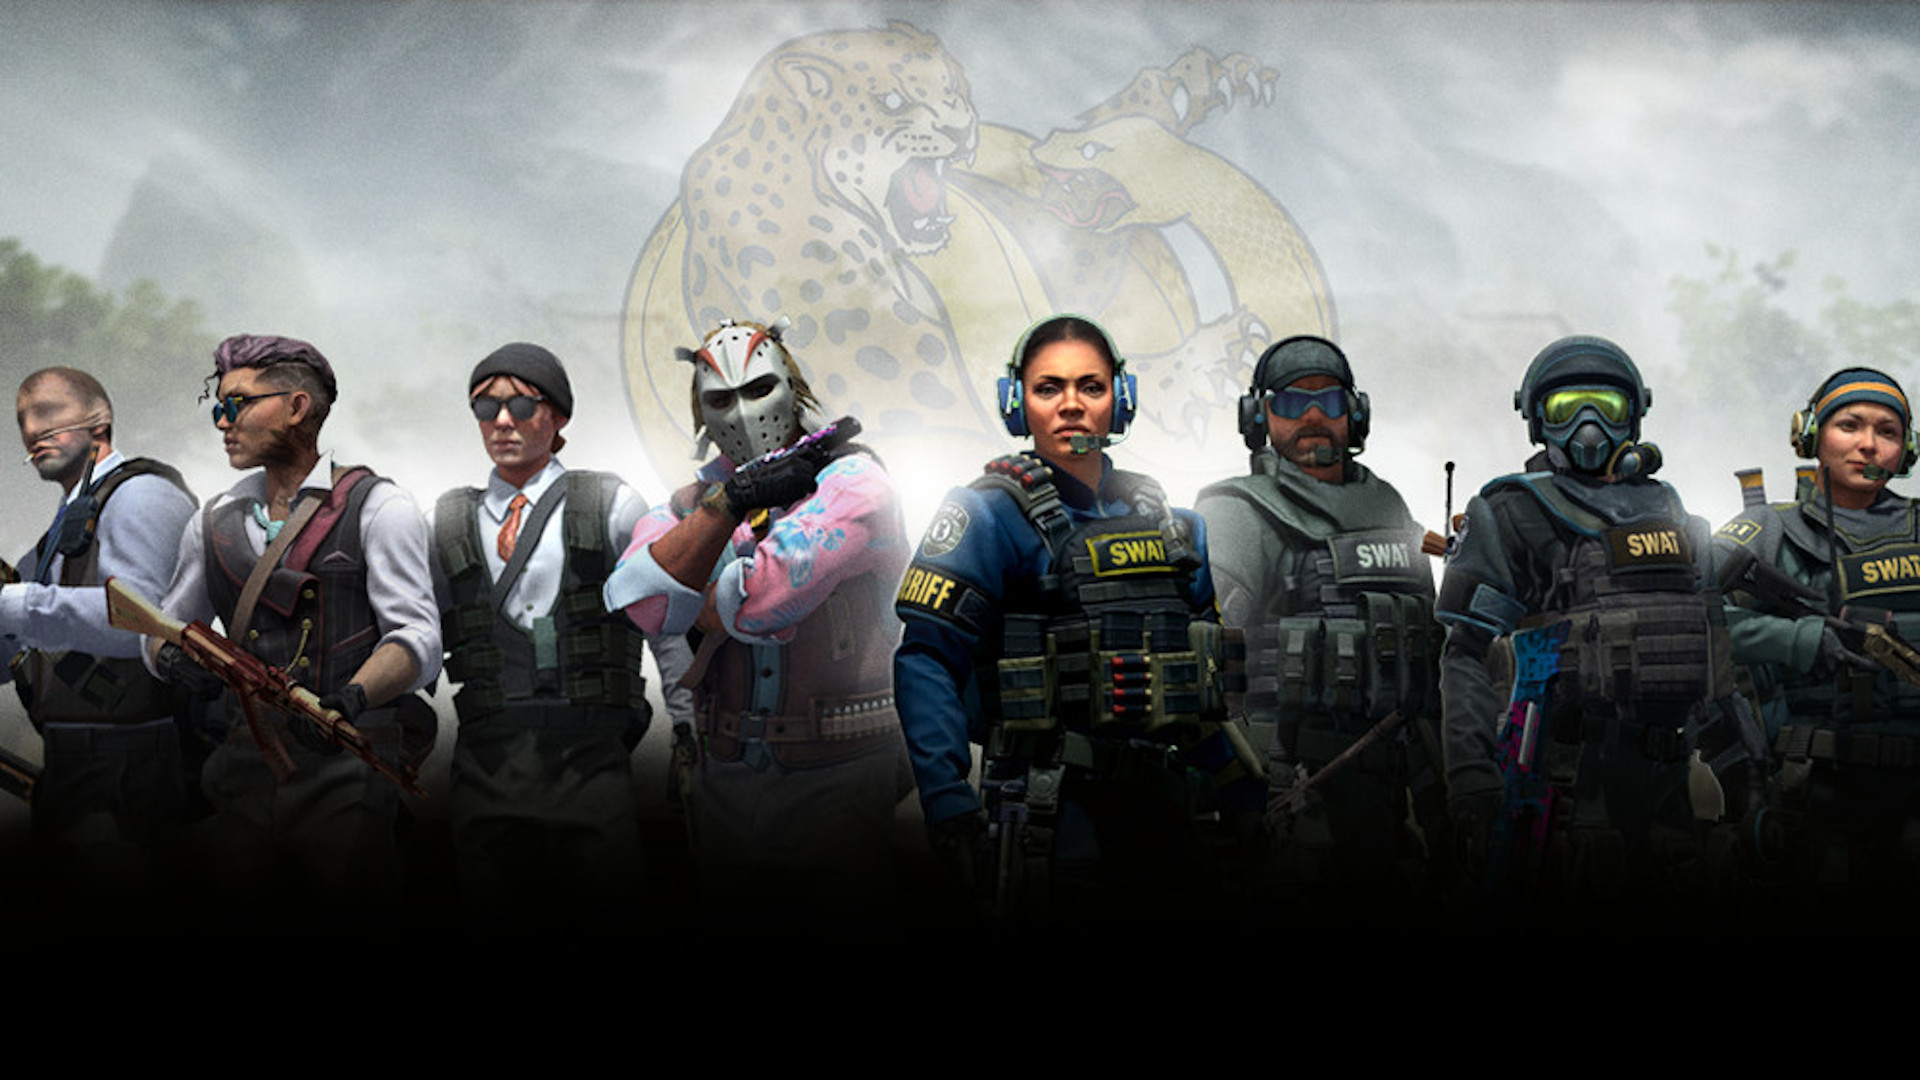 Counter-Strike: Global Offensive goes free-to-play